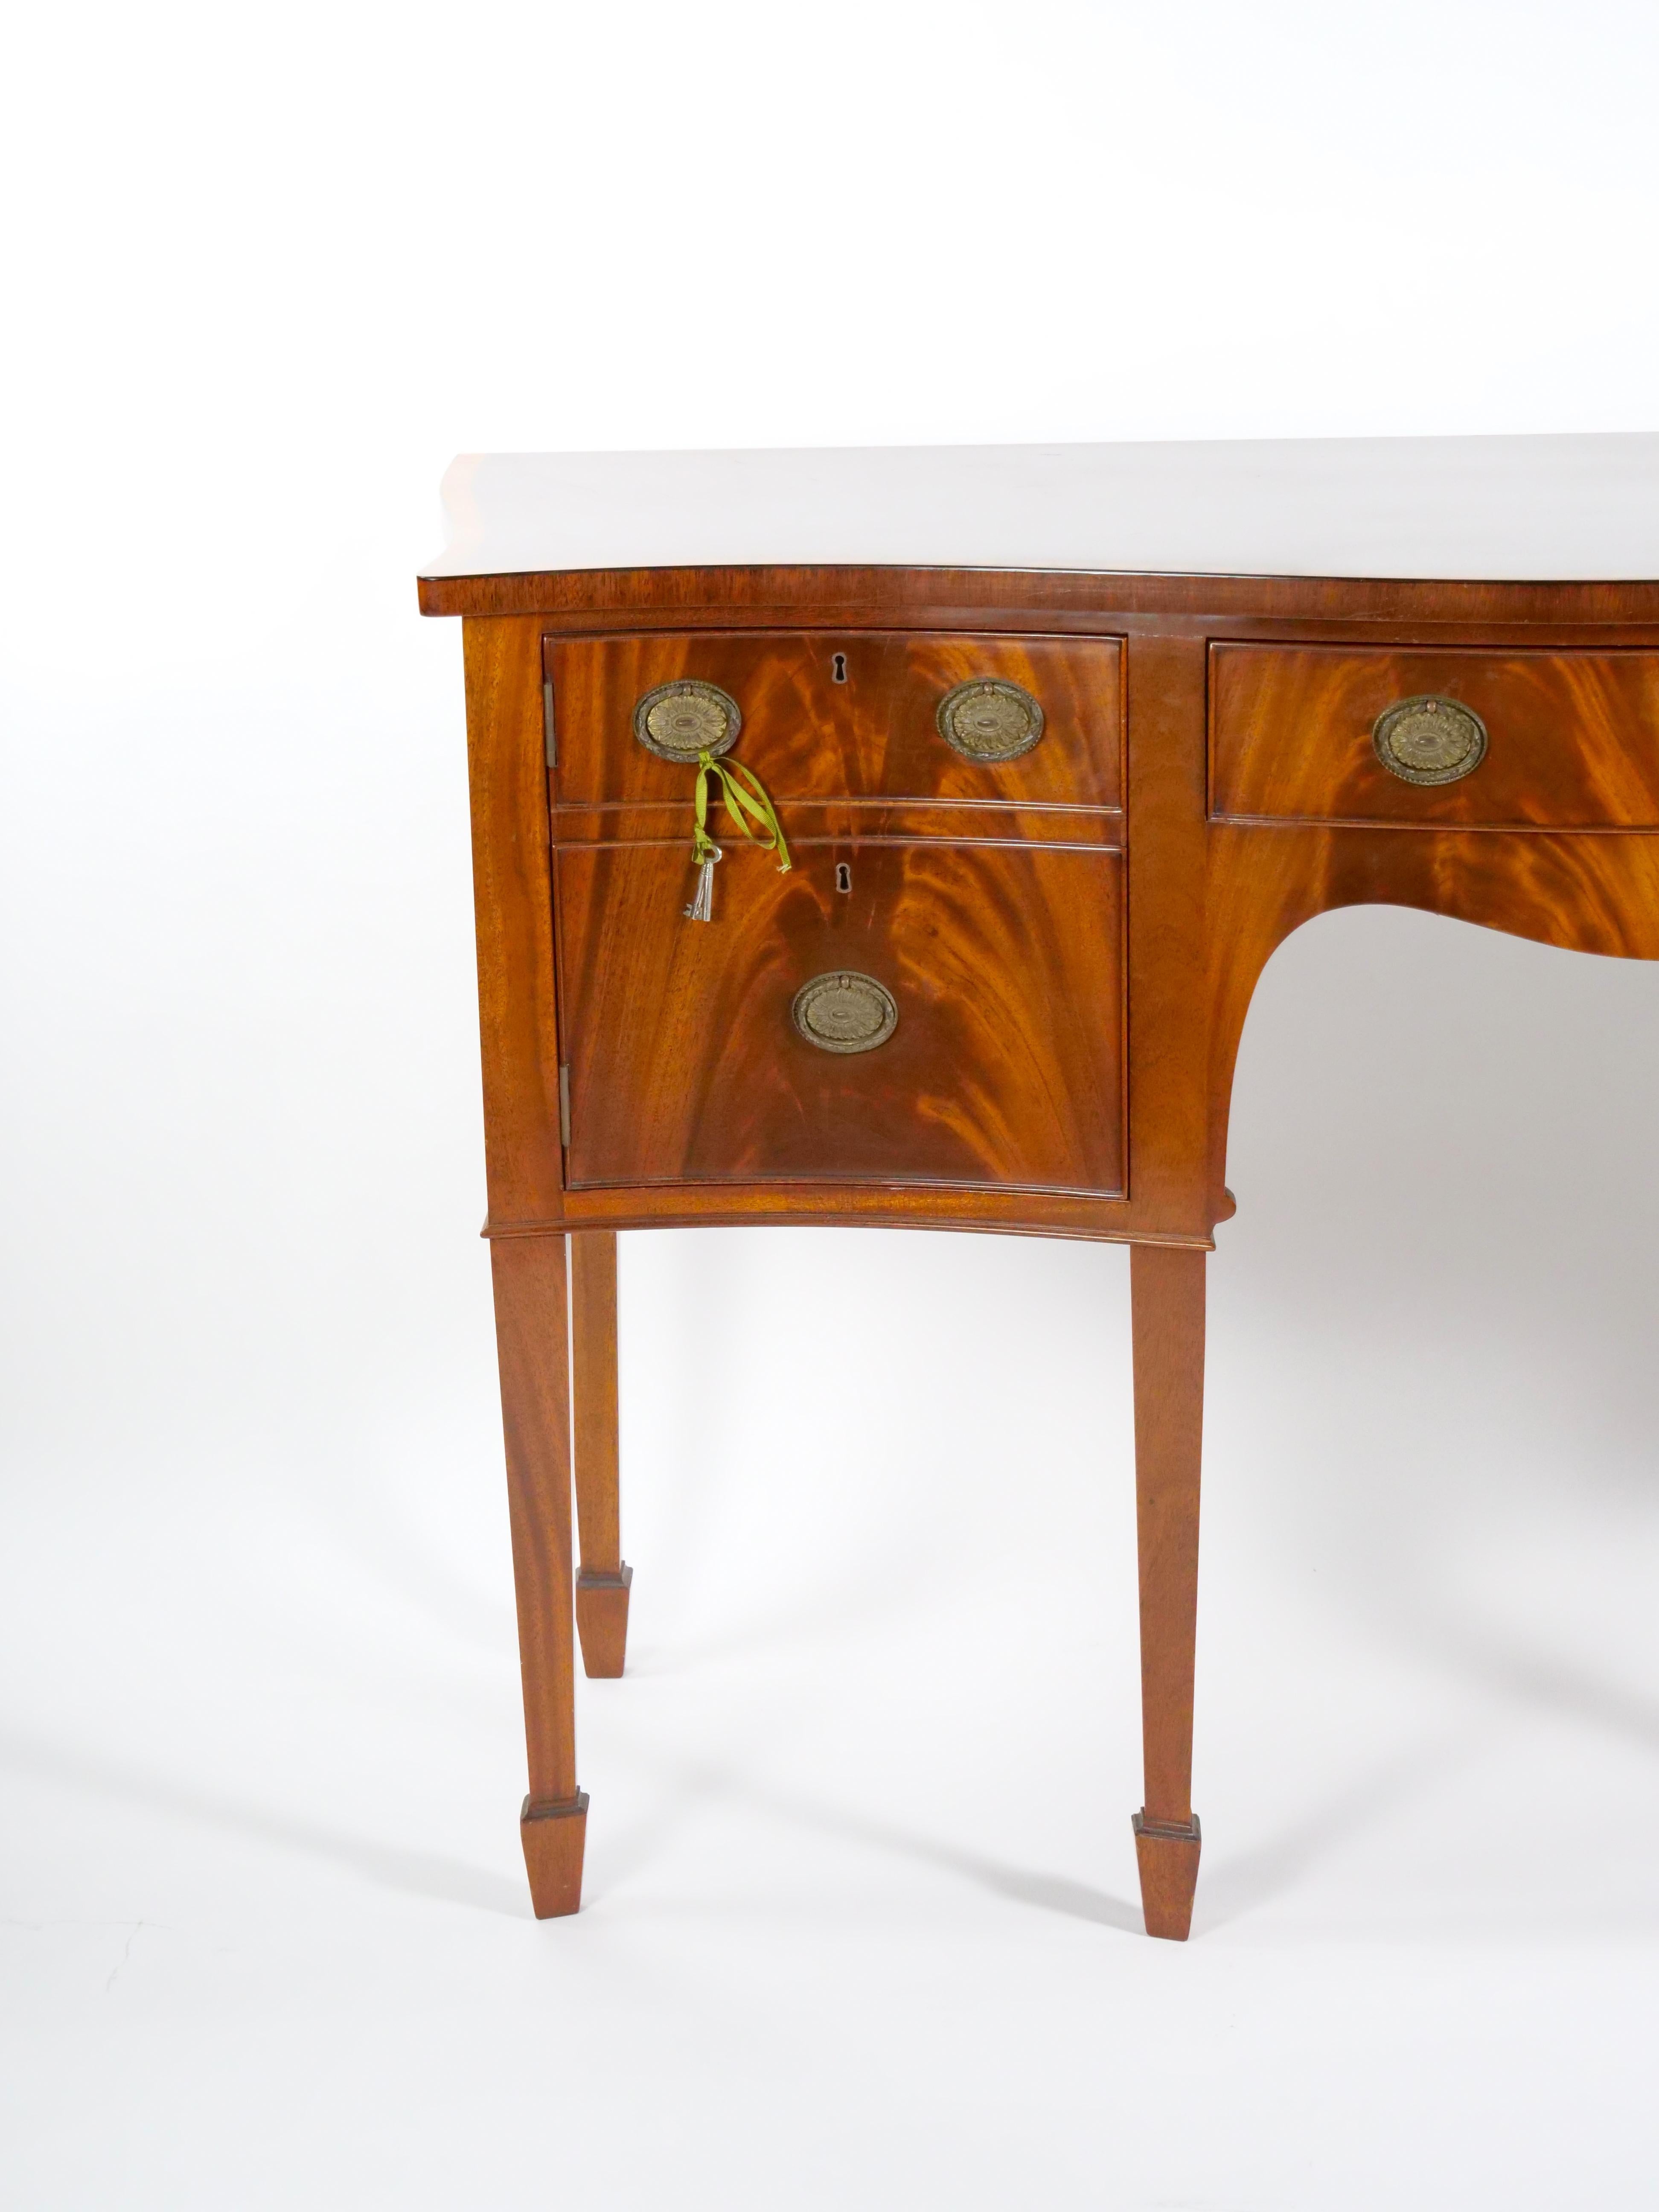 Early 20th Century George III Flame Mahogany Serpentine Sideboard / Server For Sale 2